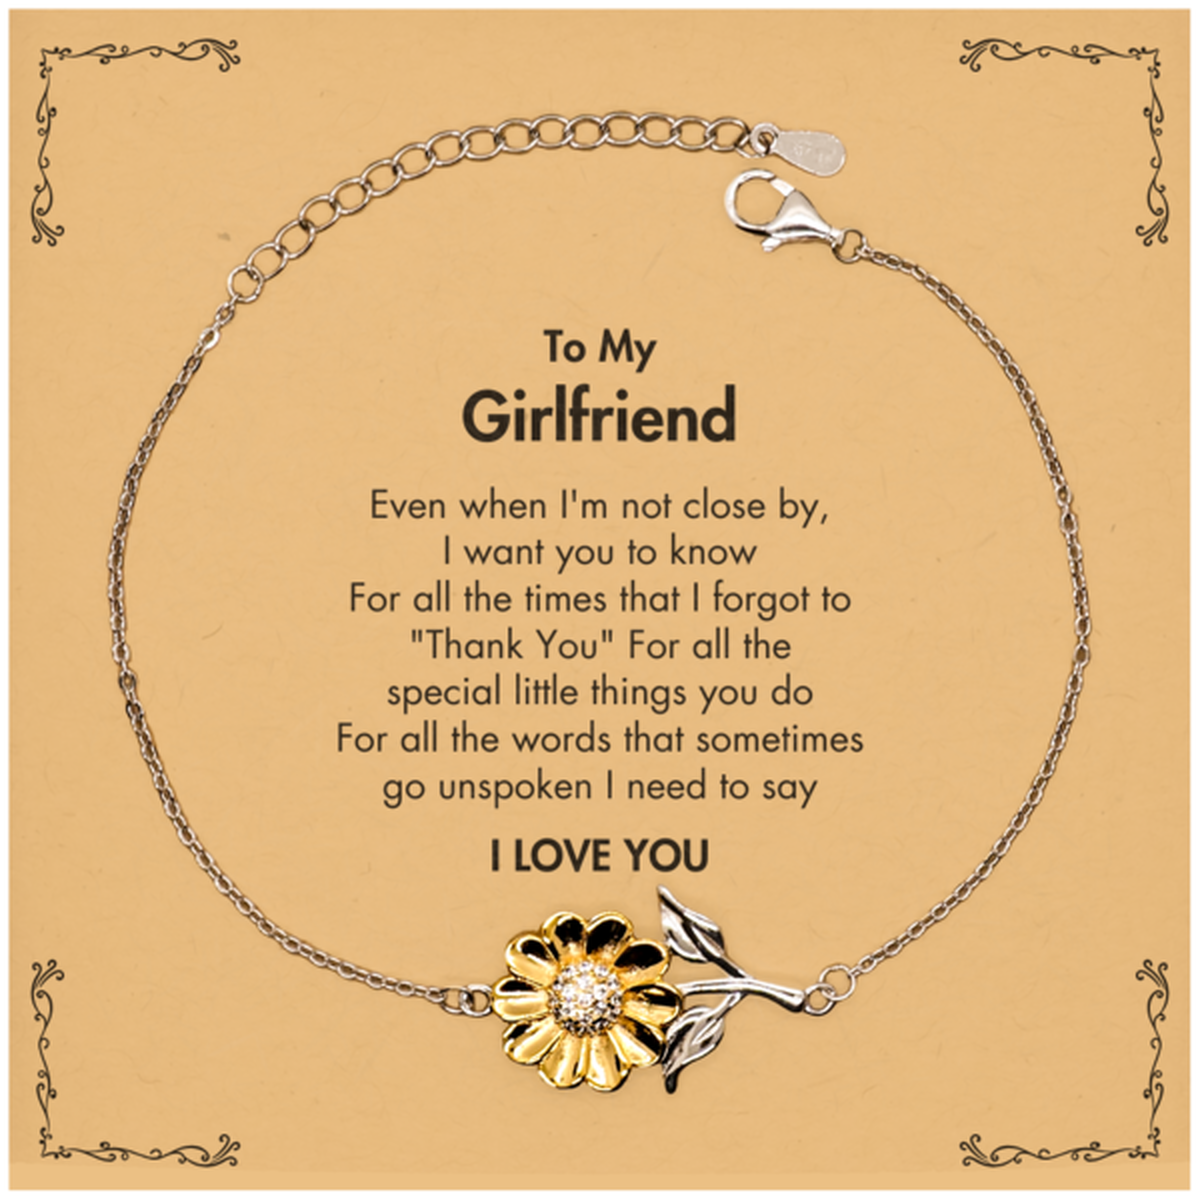 Thank You Gifts for Girlfriend, Keepsake Sunflower Bracelet Gifts for Girlfriend Birthday Mother's day Father's Day Girlfriend For all the words That sometimes go unspoken I need to say I LOVE YOU